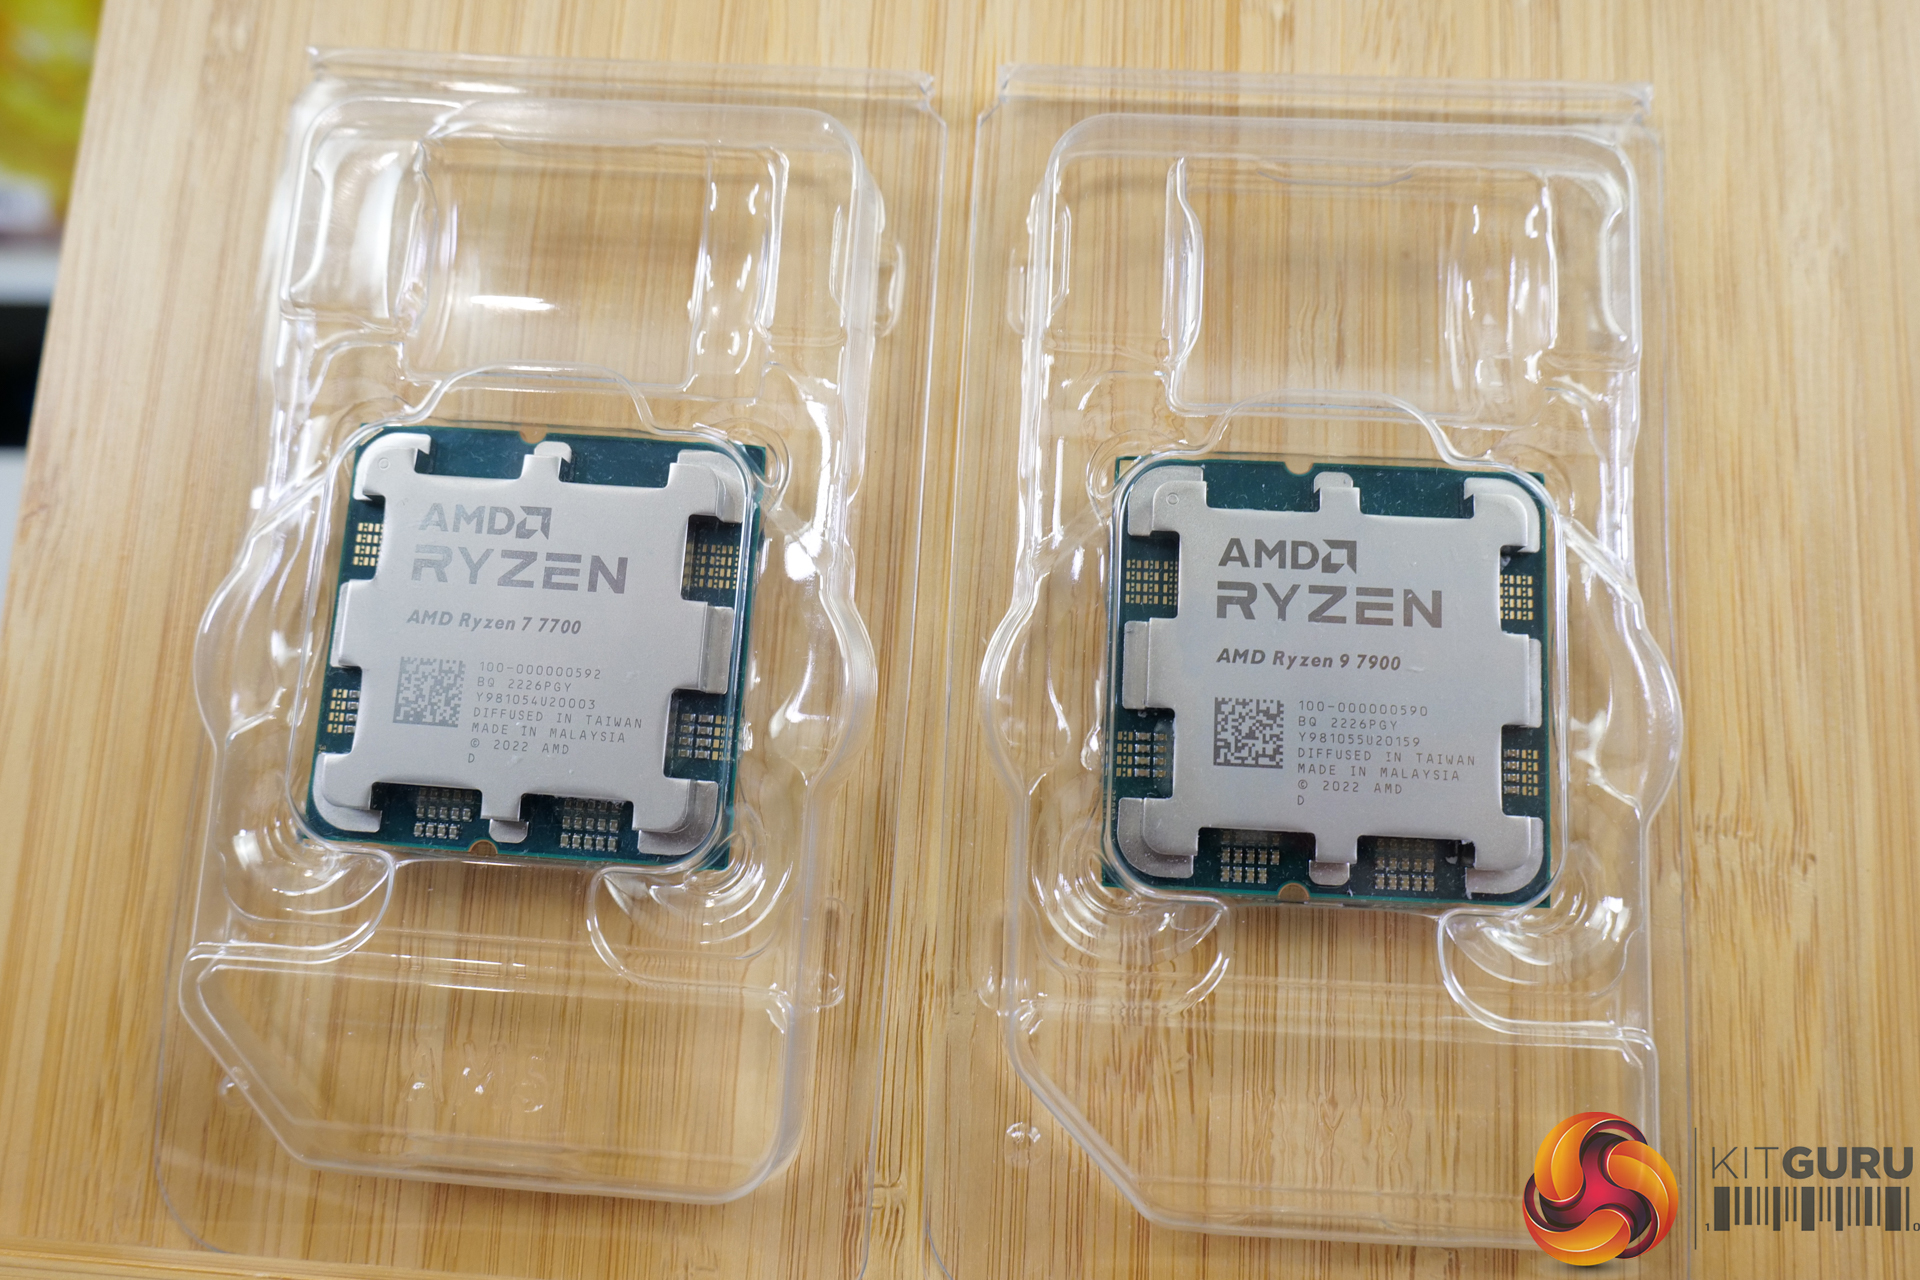 AMD Ryzen 7900 And 7700 Review: The Power Of The 65W CPUs Cometh